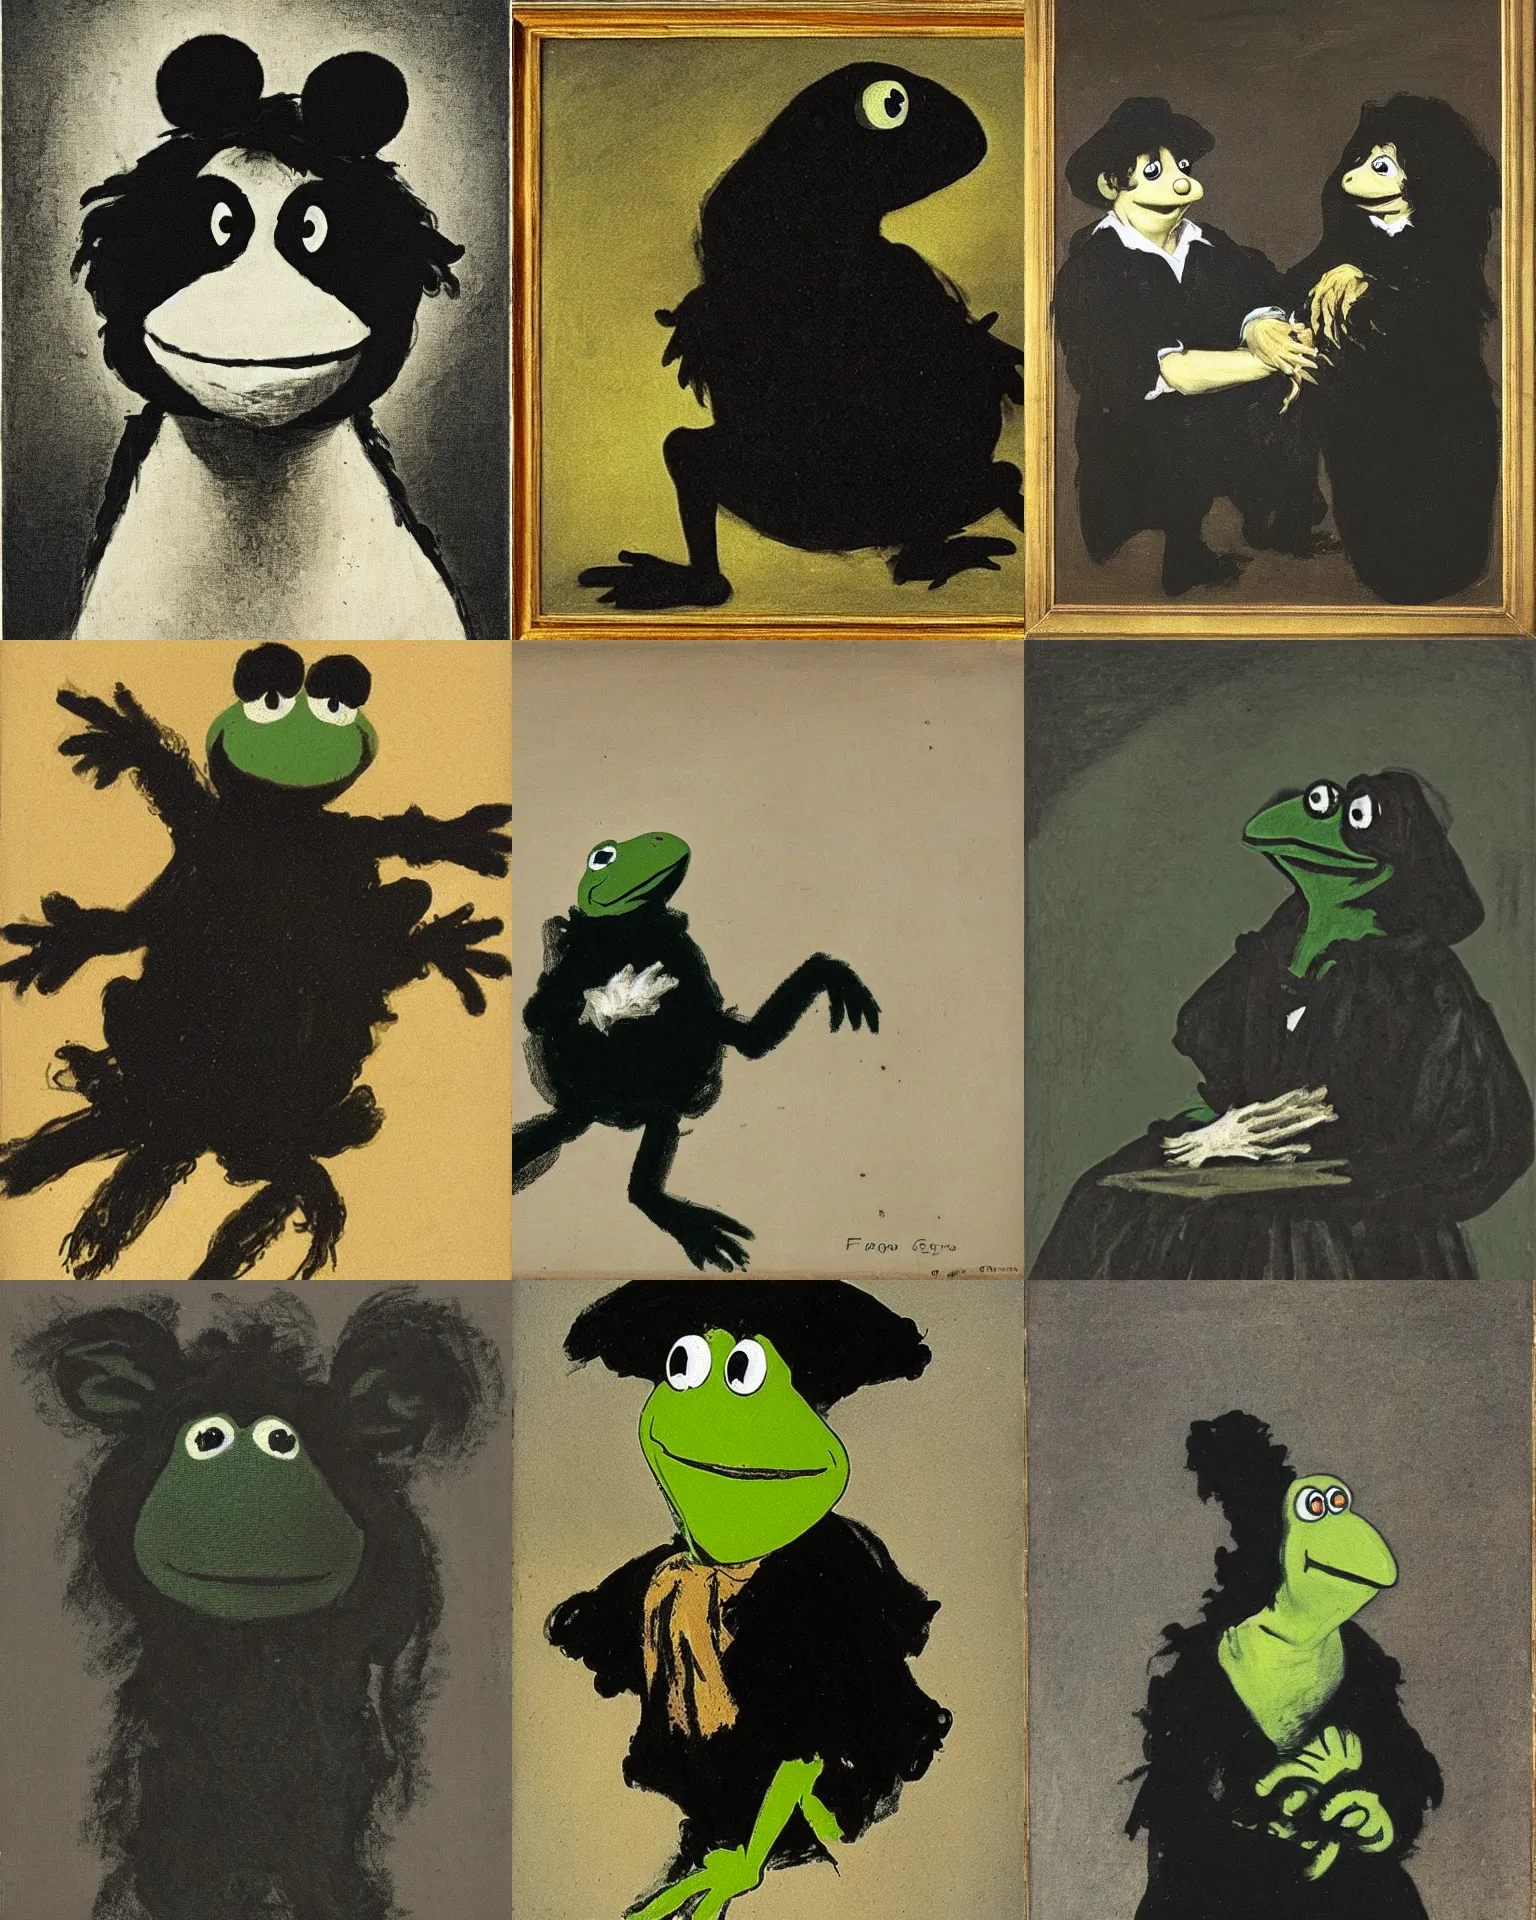 Prompt: One of Francisco Goya's Black Paintings, depicting Kermit the Frog